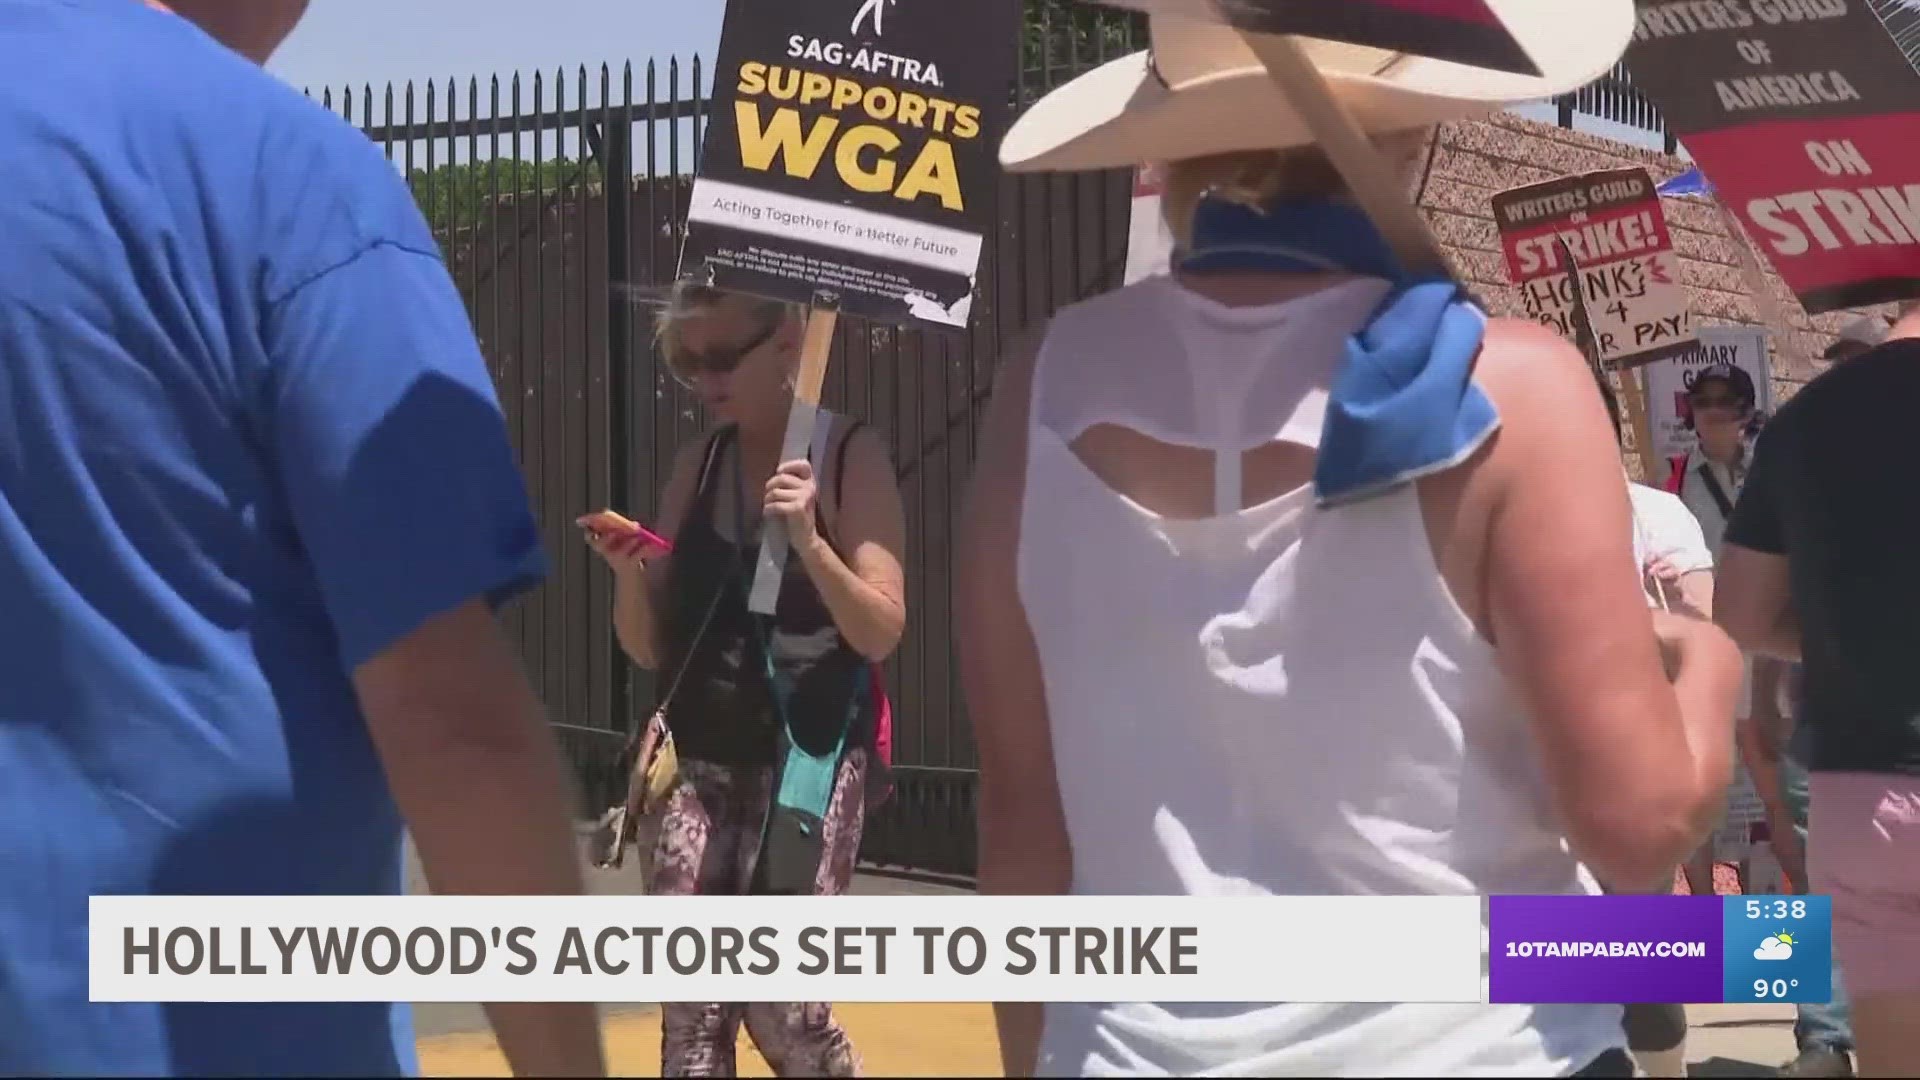 It will be the first time since 1960 that Hollywood actors and writers were on strike at the same time.